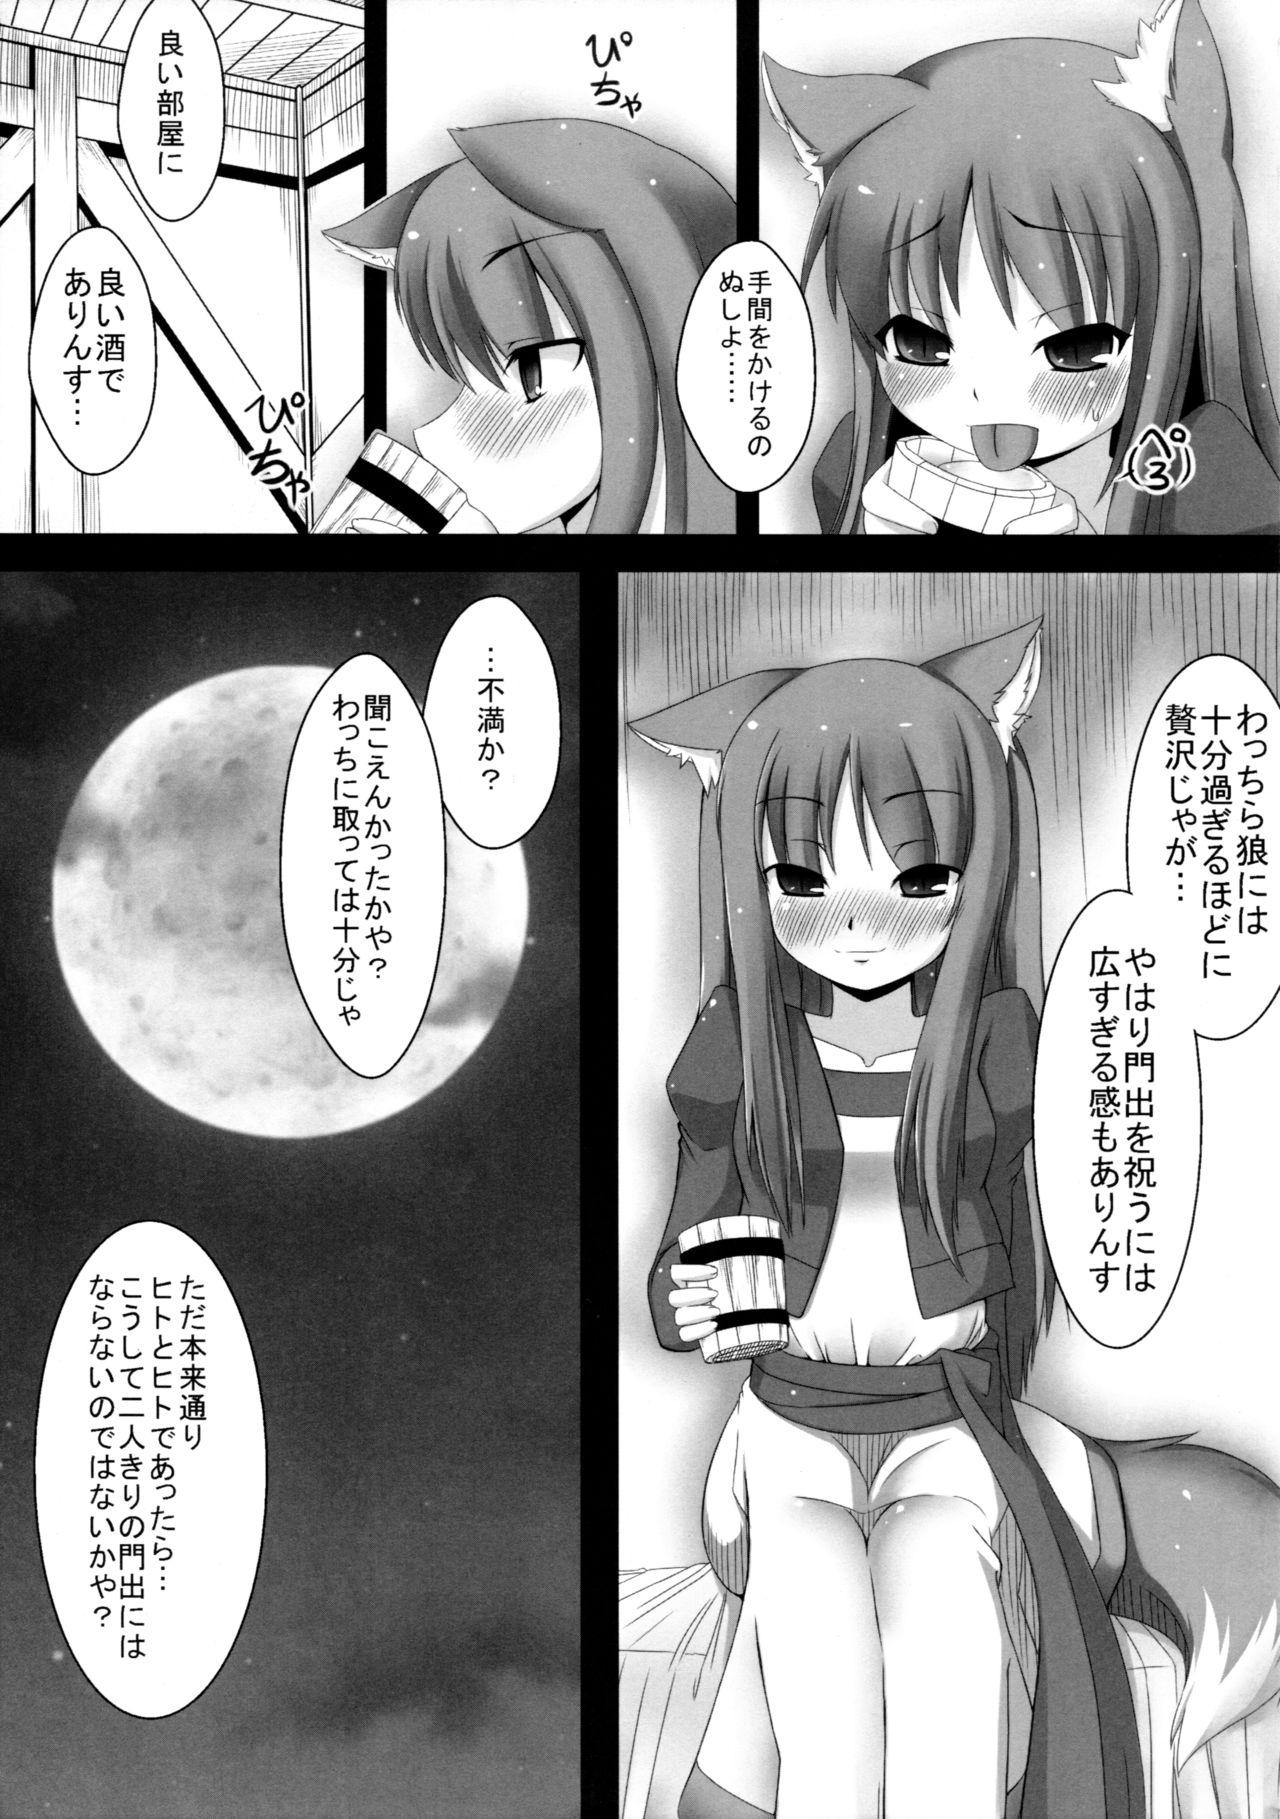 Mexicana Ookami to Yoi no Sakana - Spice and wolf Stepsiblings - Page 6